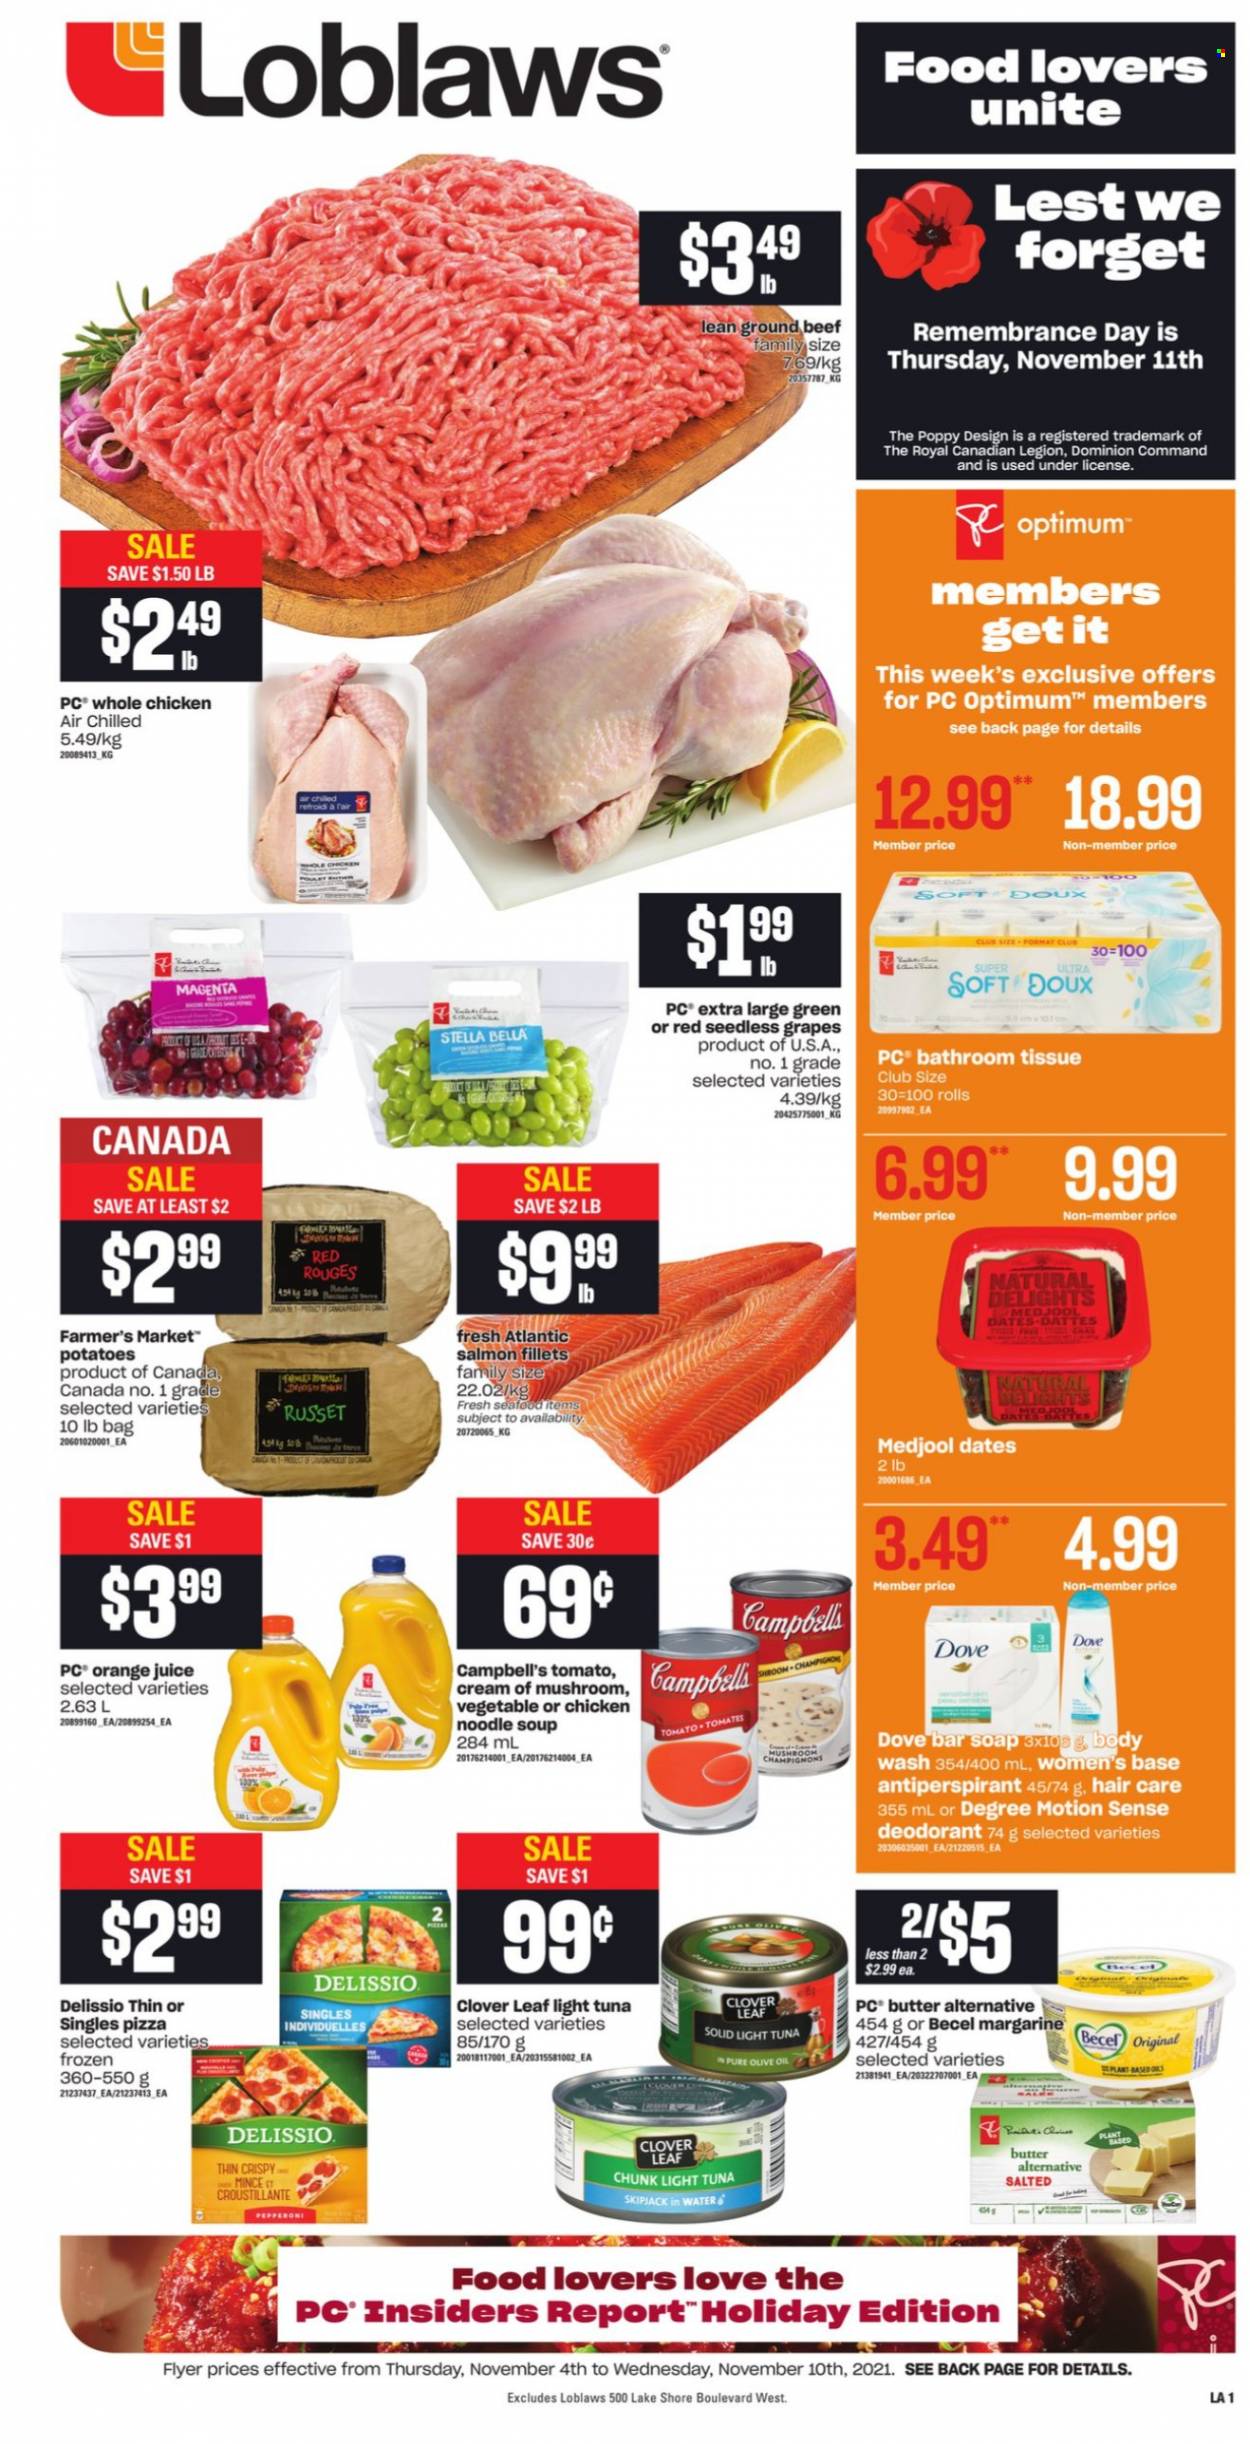 thumbnail - Loblaws Flyer - November 04, 2021 - November 10, 2021 - Sales products - Bella, russet potatoes, potatoes, grapes, seedless grapes, salmon, salmon fillet, tuna, seafood, Campbell's, pizza, soup, noodles cup, noodles, pepperoni, Clover, butter, margarine, light tuna, olive oil, oil, dried dates, orange juice, juice, whole chicken, chicken, beef meat, ground beef, bath tissue, body wash, soap bar, soap, anti-perspirant, Optimum, Dove, deodorant. Page 1.